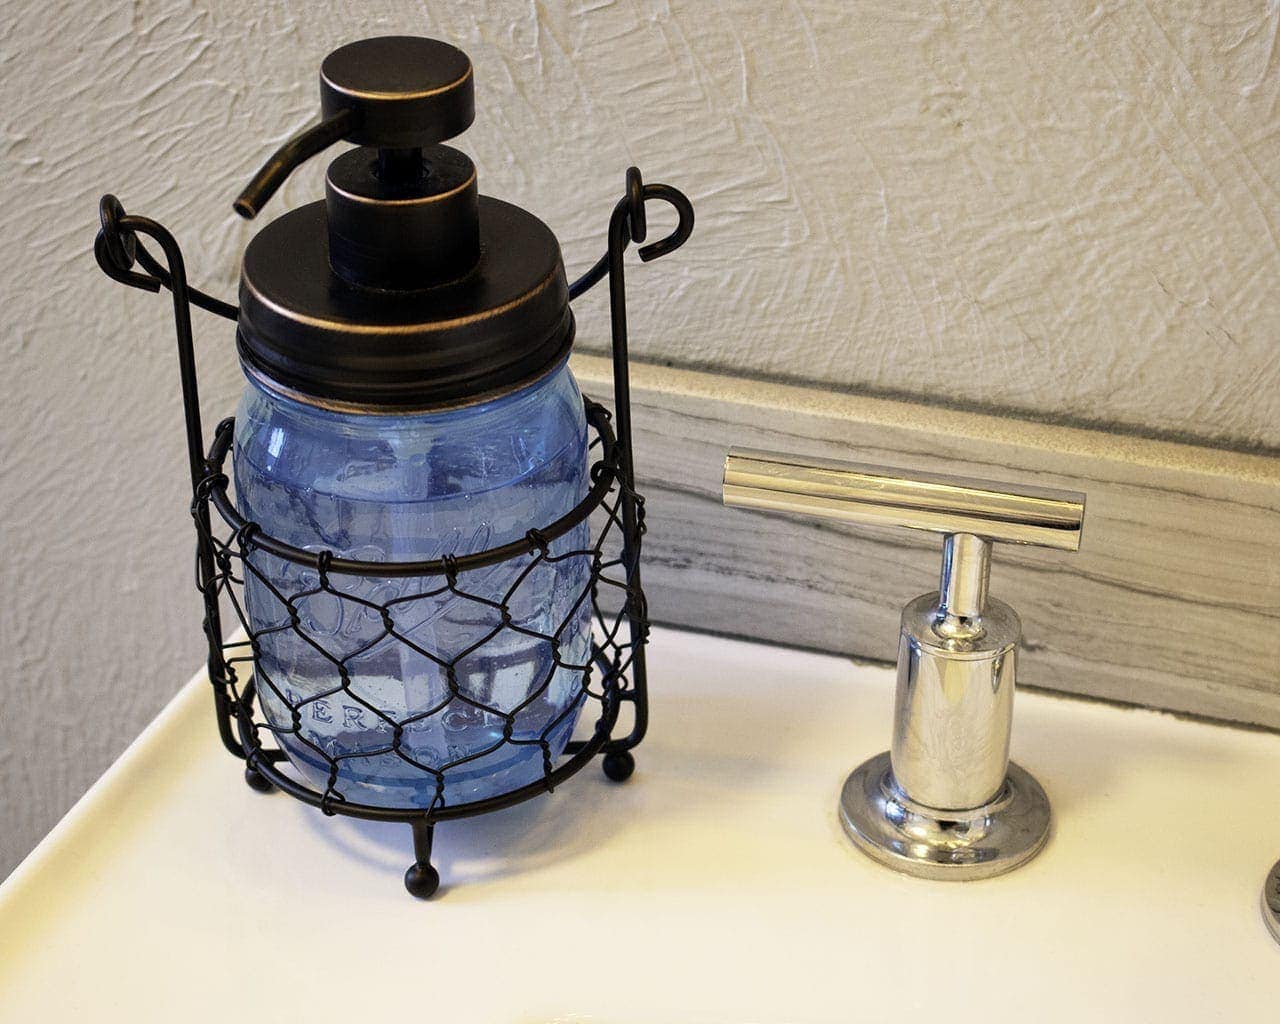 one-jar-caddy-carrying-holding-hanging-pint-16oz-mason-jar-chicken-wire-soap-pump-blue-sink